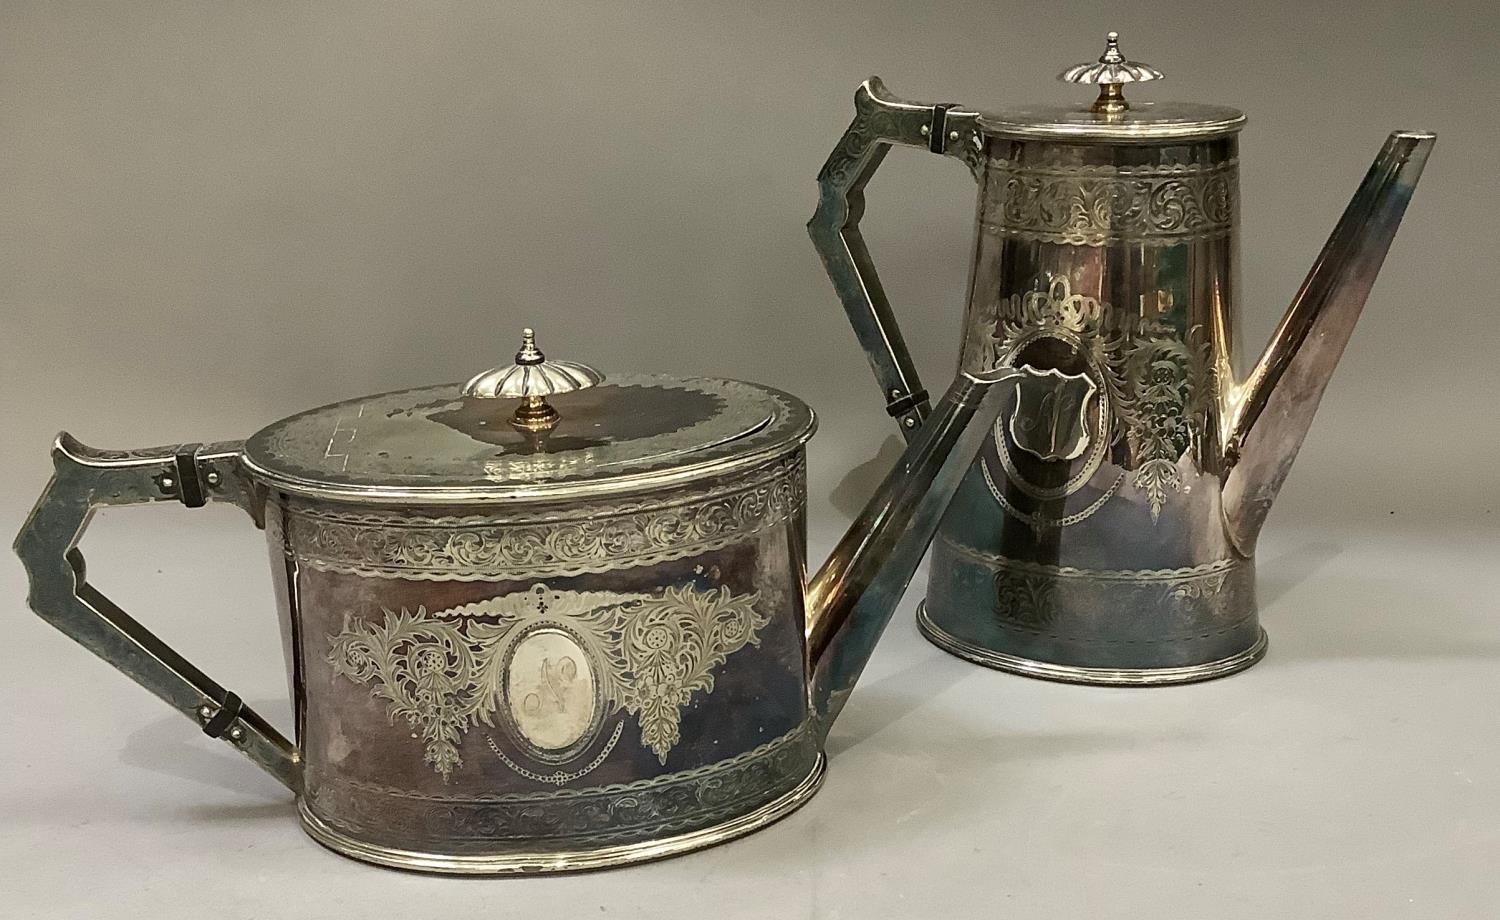 A Victorian silver plated teapot and coffee pot by Elkington & Co, oval outline engraved with